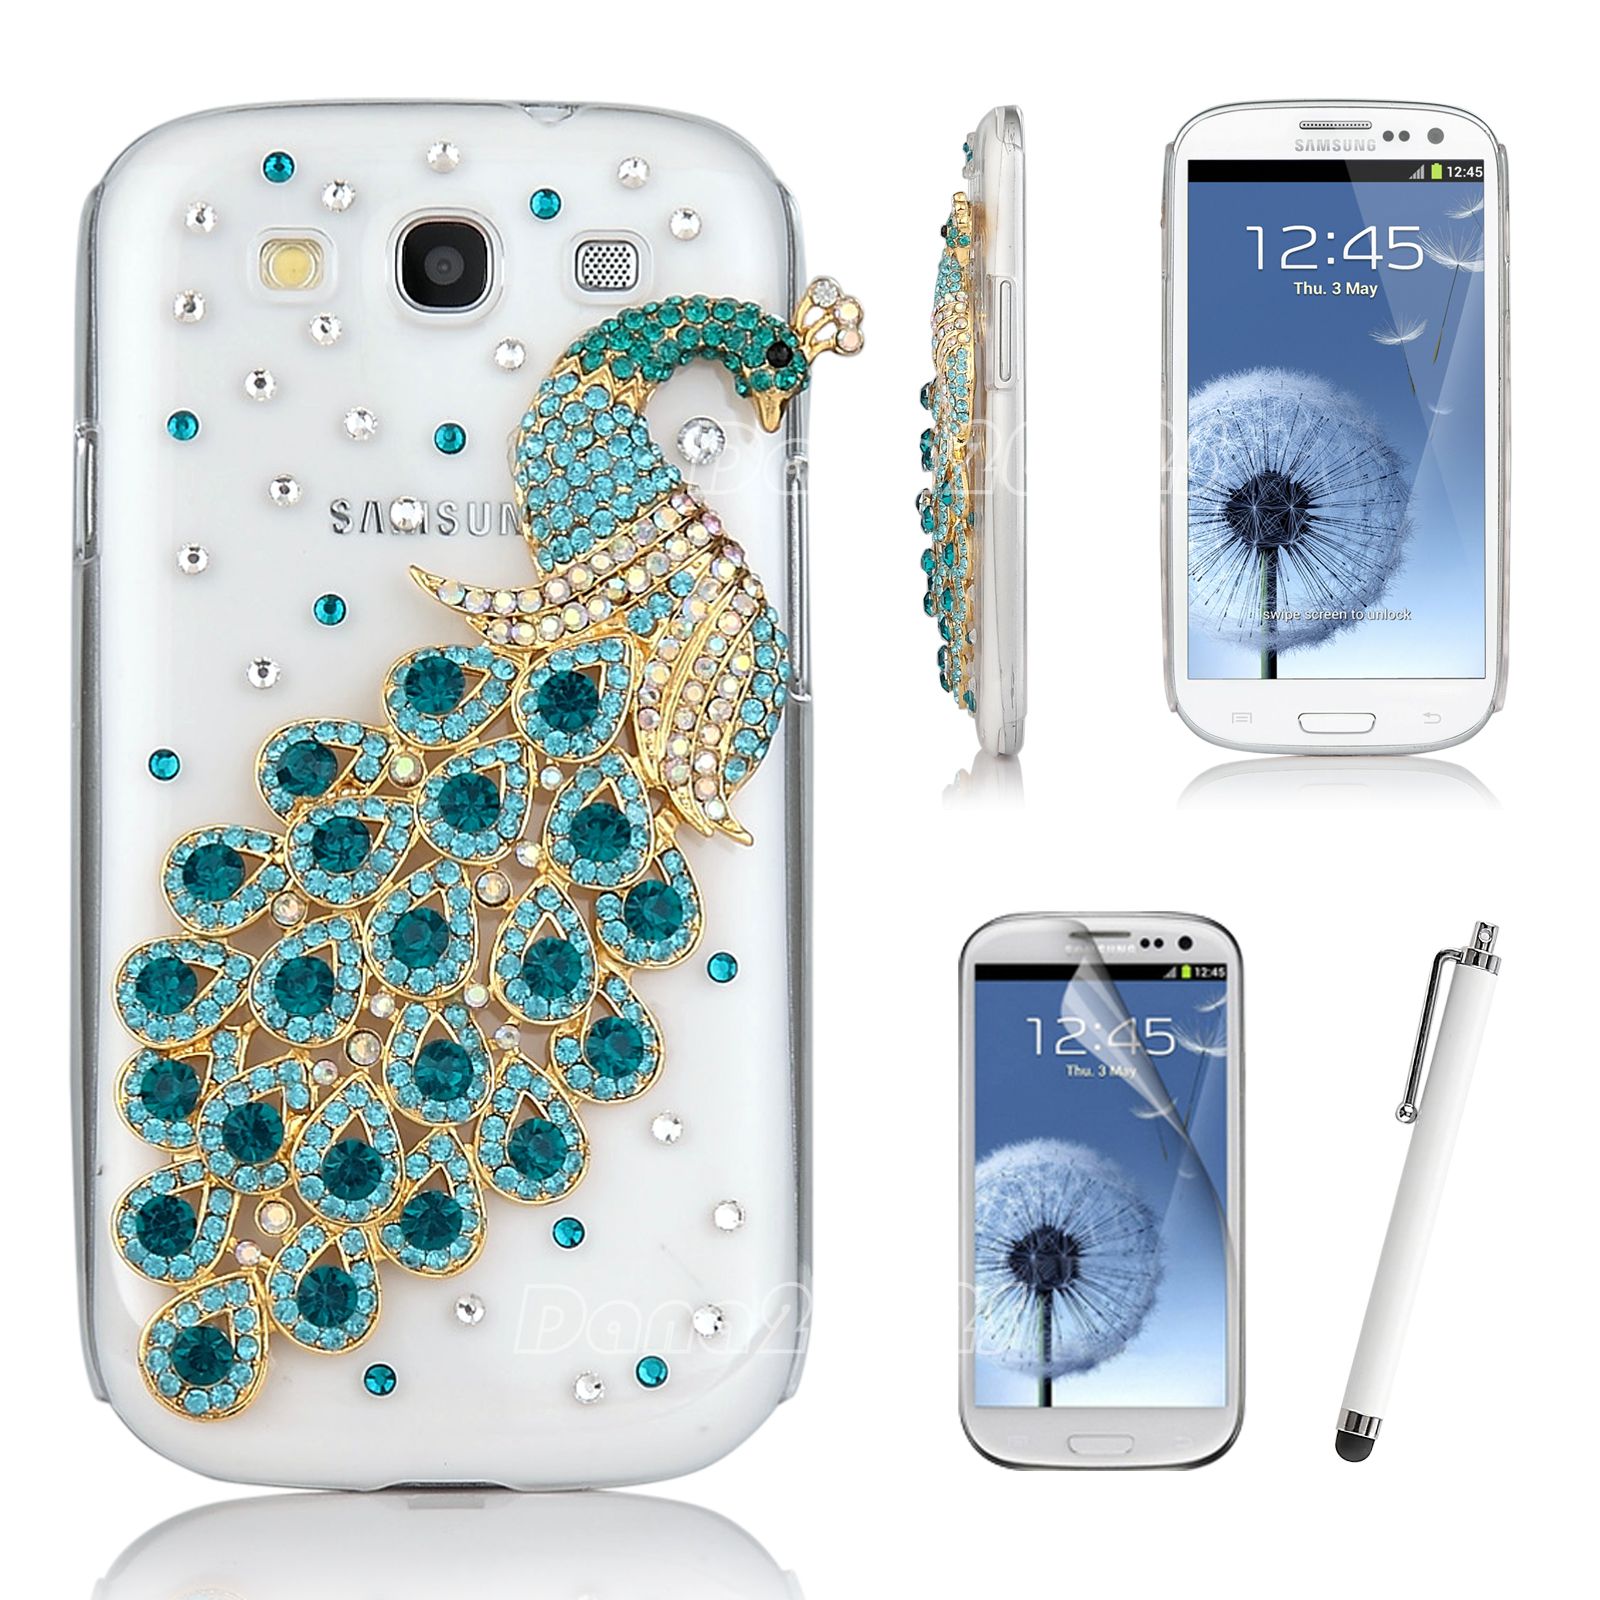 Bling 3D Peacock Rhinestone Case Cover for Samsung Galaxy S3 III i9300 